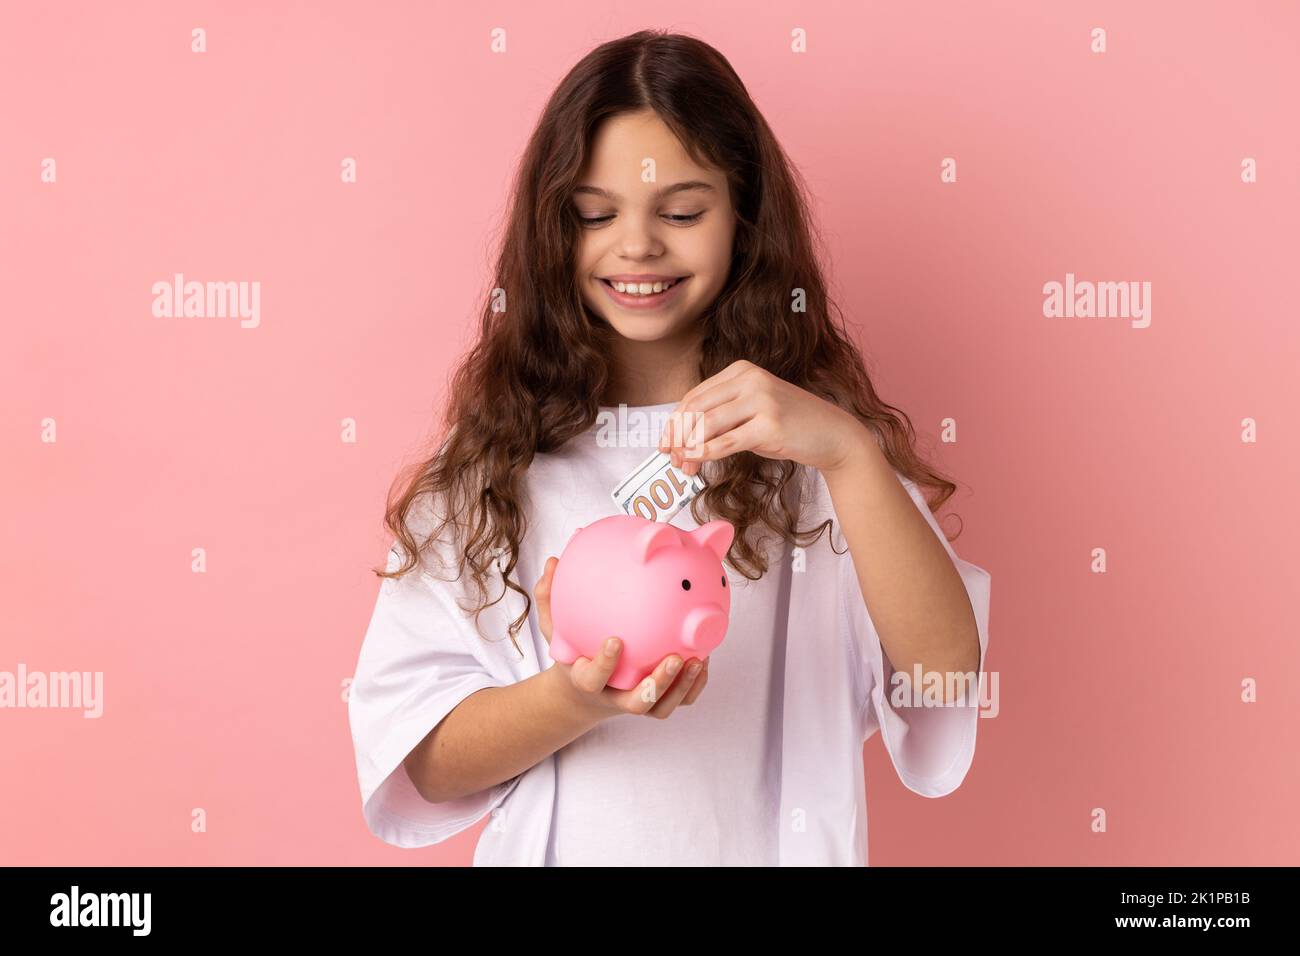 Portrait of delighted smiling little girl wearing white T-shirt standing and putting dollar banknote into piggy bank, saving money. Indoor studio shot isolated on pink background. Stock Photo